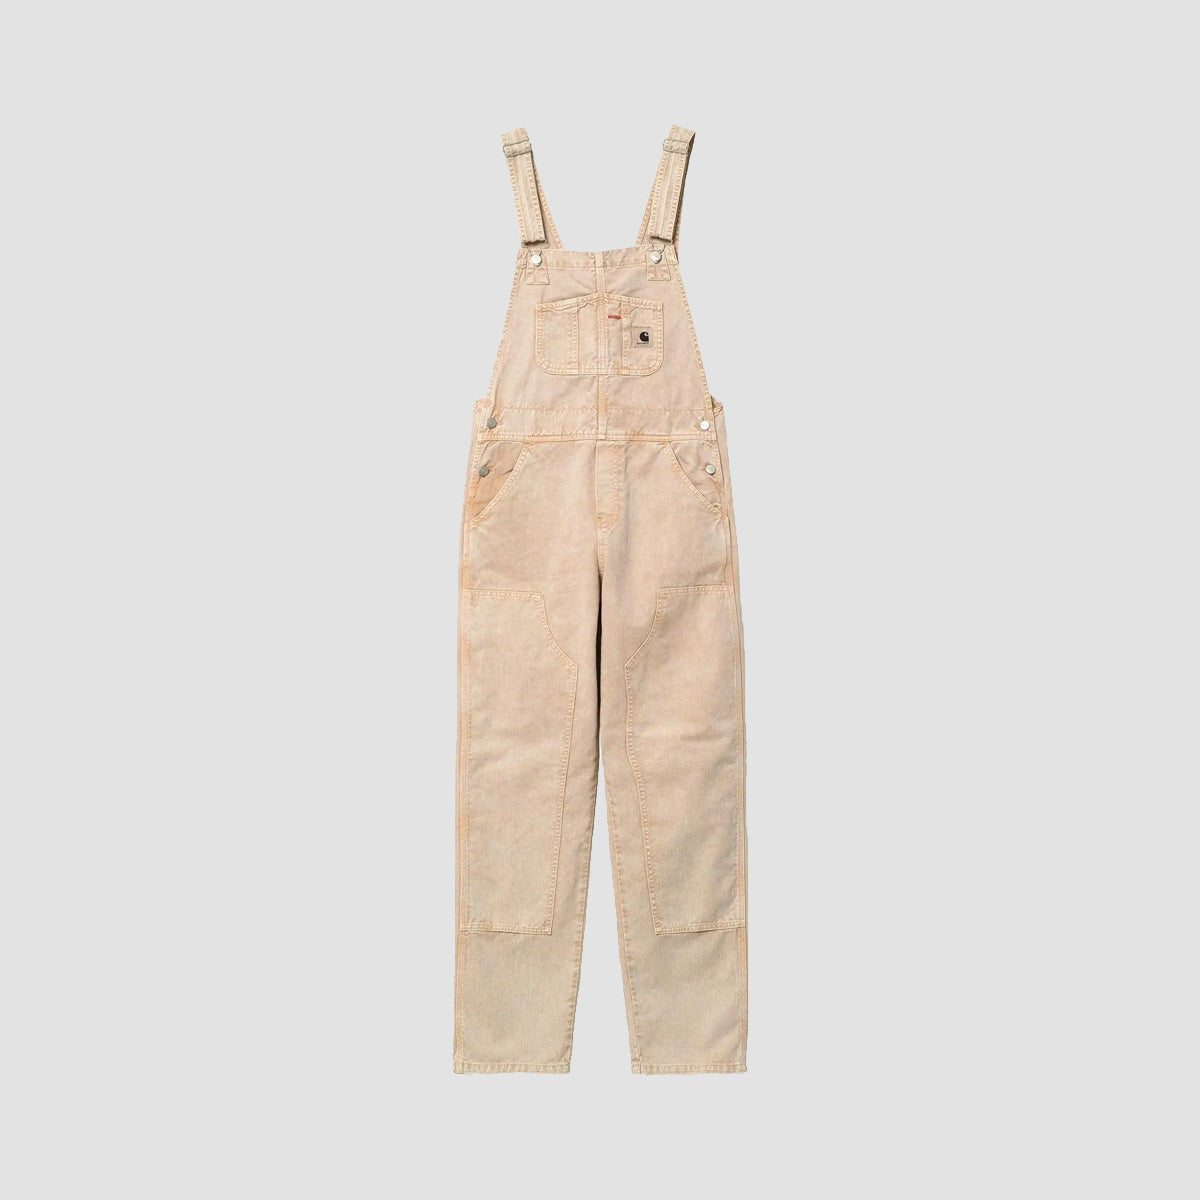 Carhartt WIP Sonora Overall Dusty Hamilton Brown Worn Washed - Womens